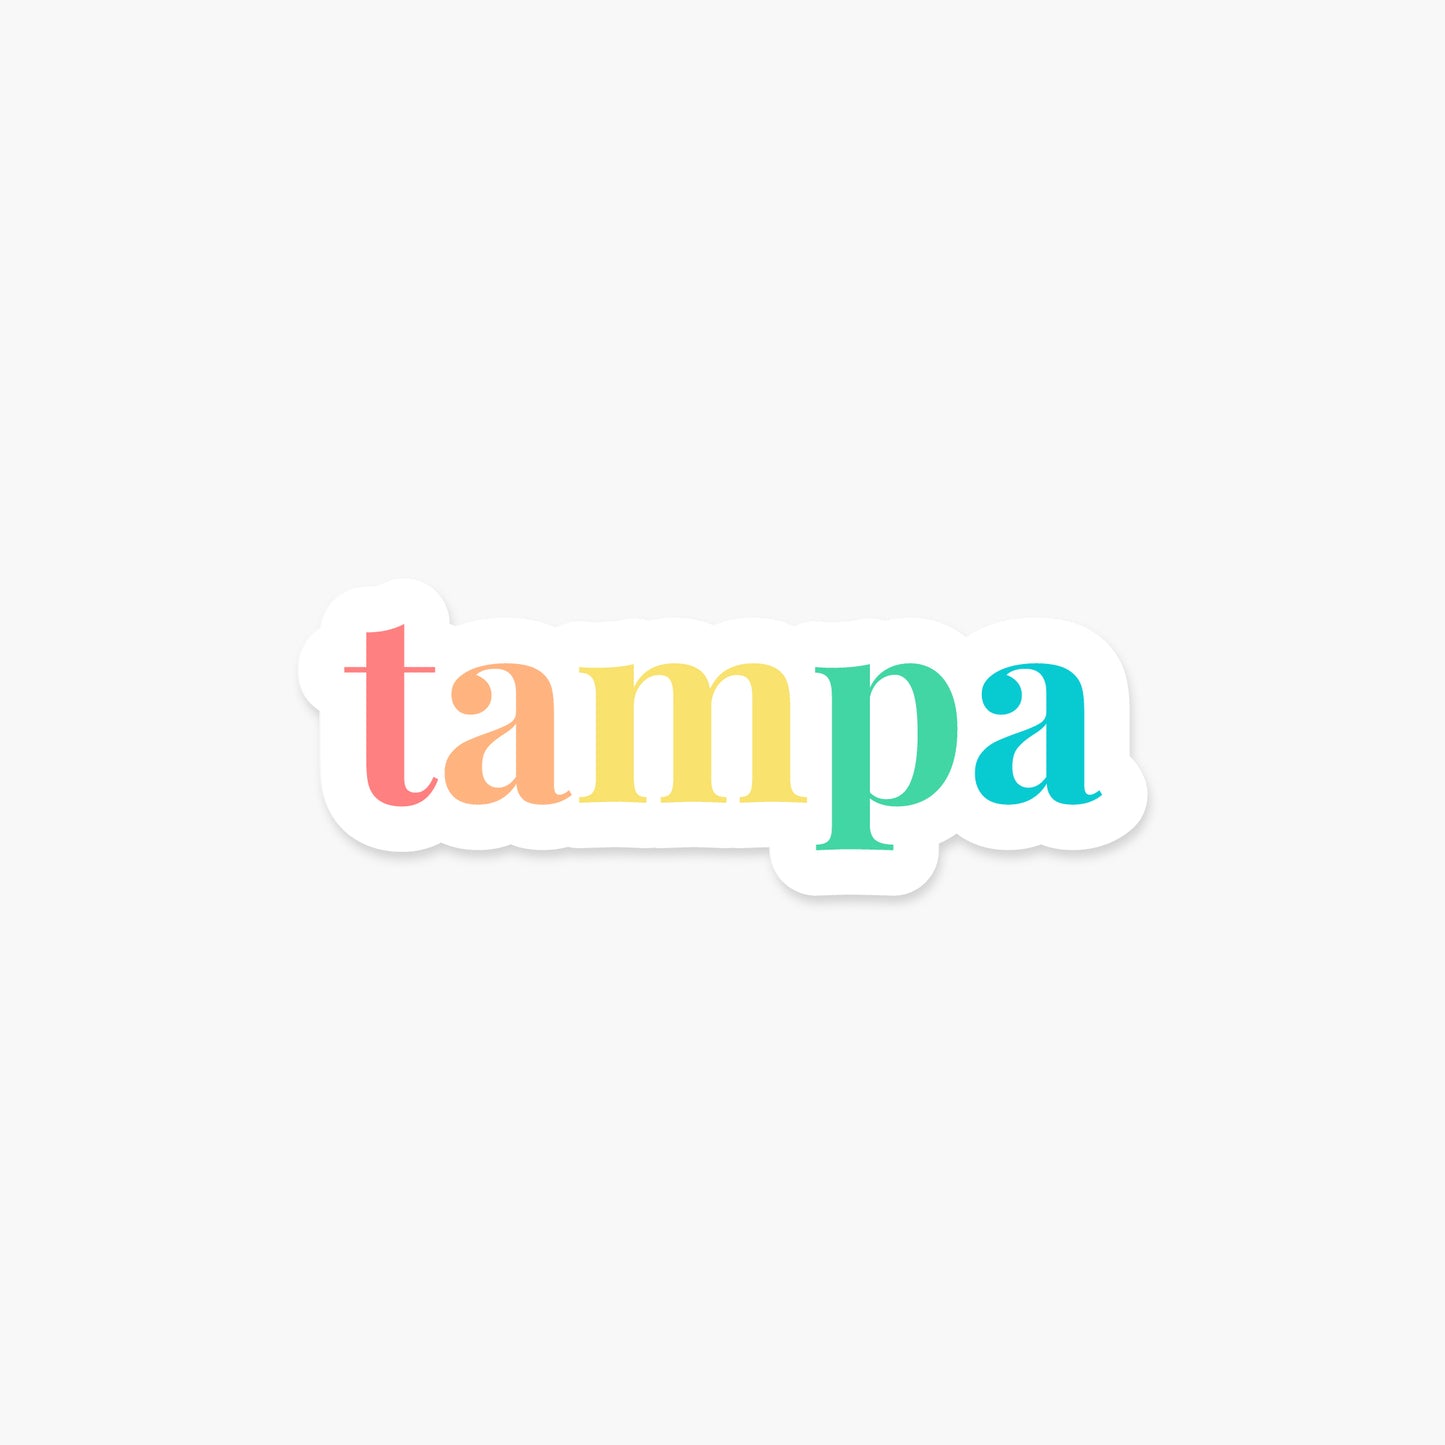 Tampa, Florida - Everyday Sticker | Footnotes Paper